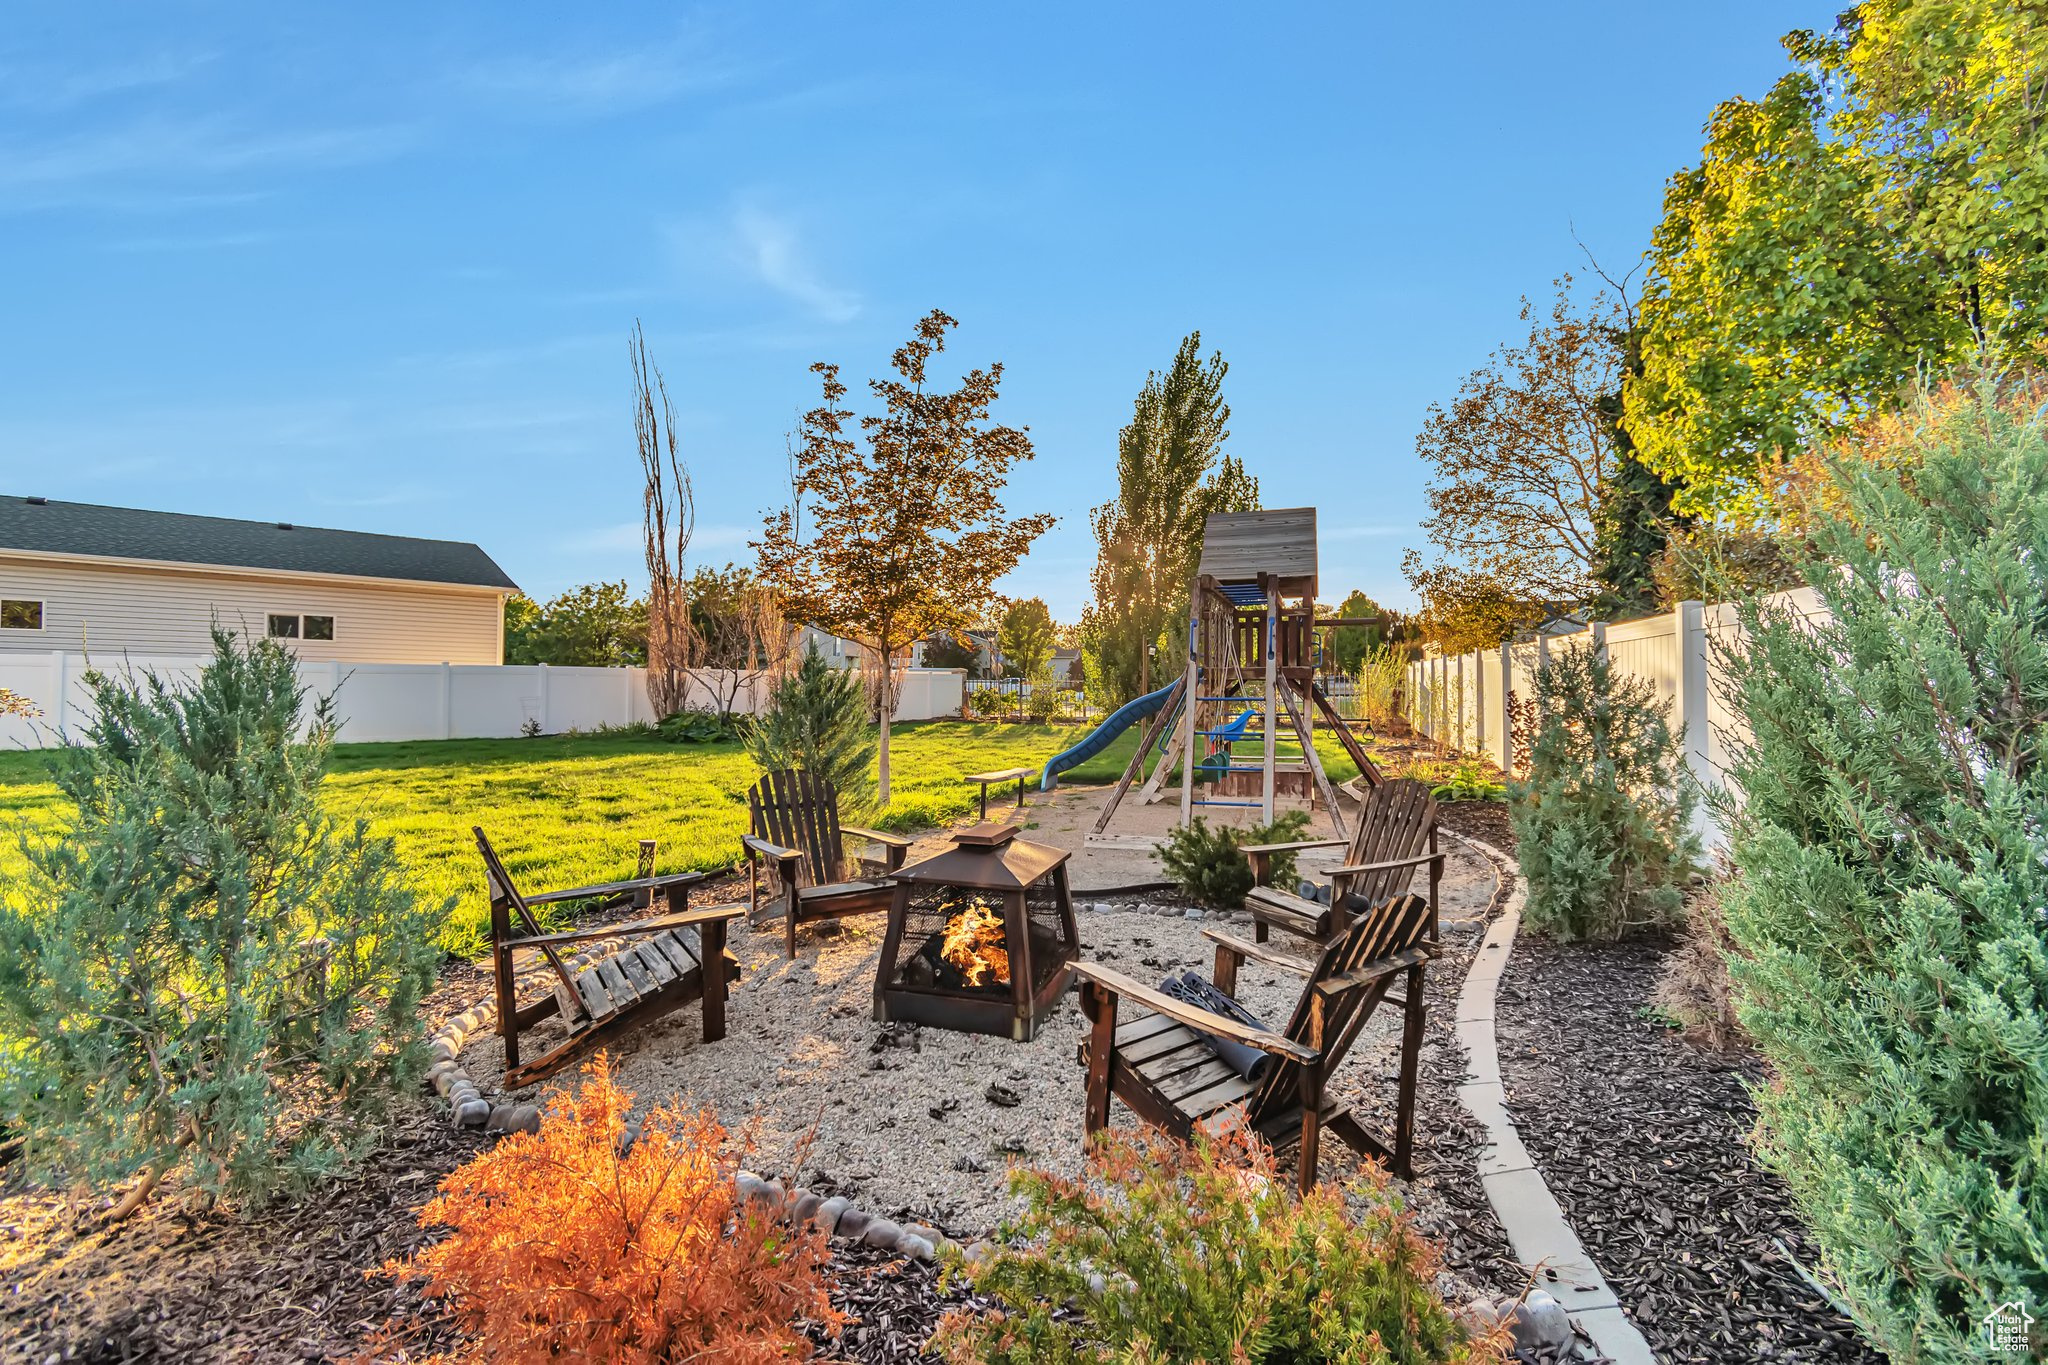 View of patio / terrace featuring a playground and fire pit area.